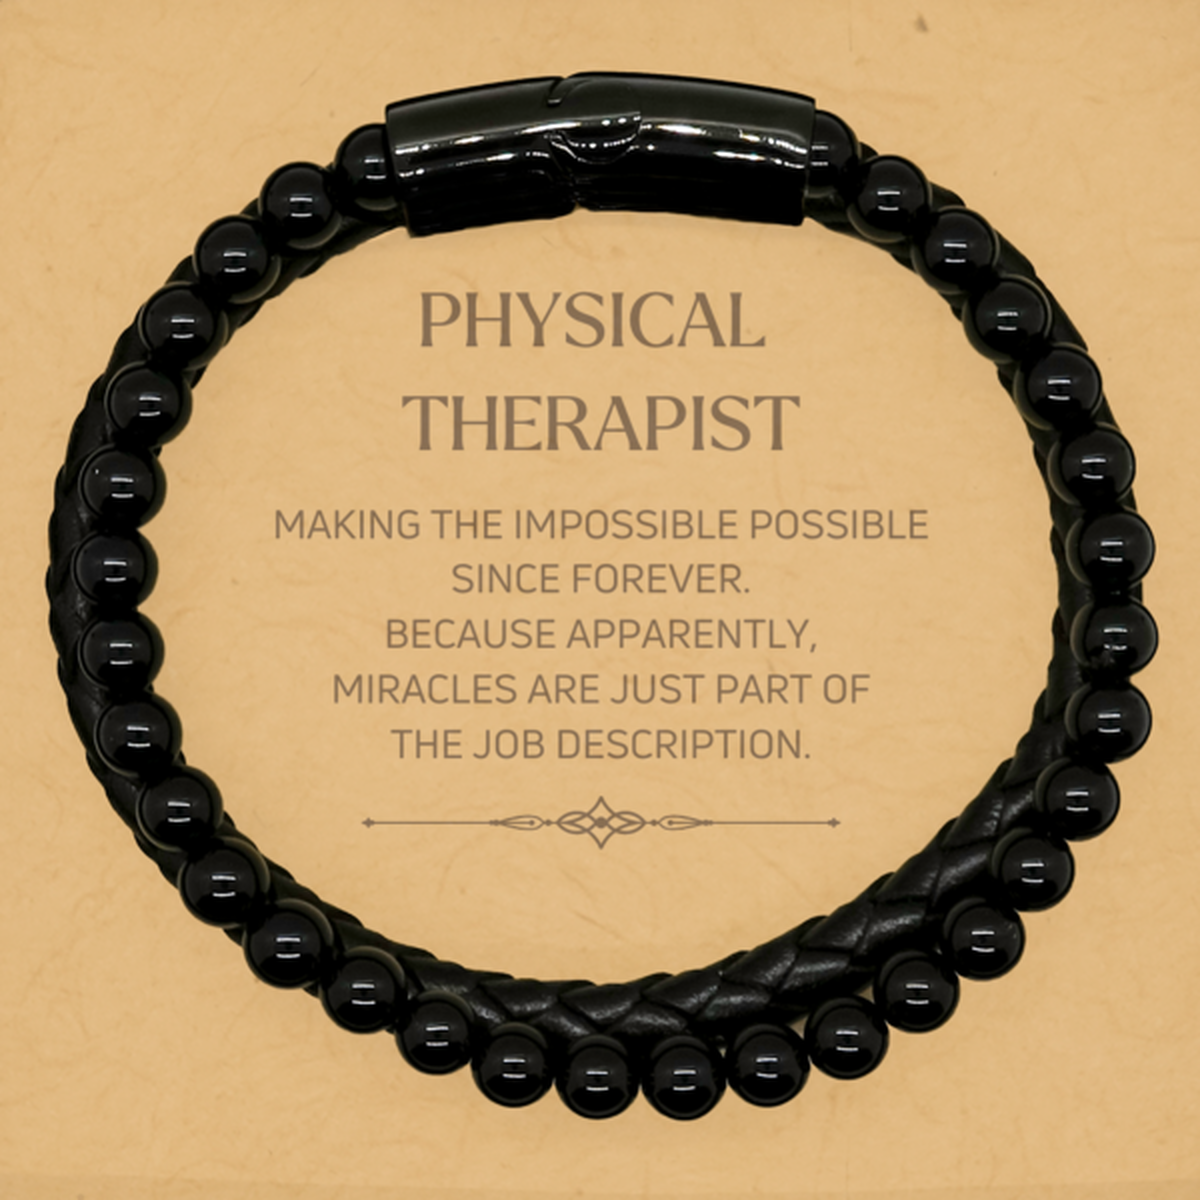 Funny Physical Therapist Gifts, Miracles are just part of the job description, Inspirational Birthday Stone Leather Bracelets For Physical Therapist, Men, Women, Coworkers, Friends, Boss